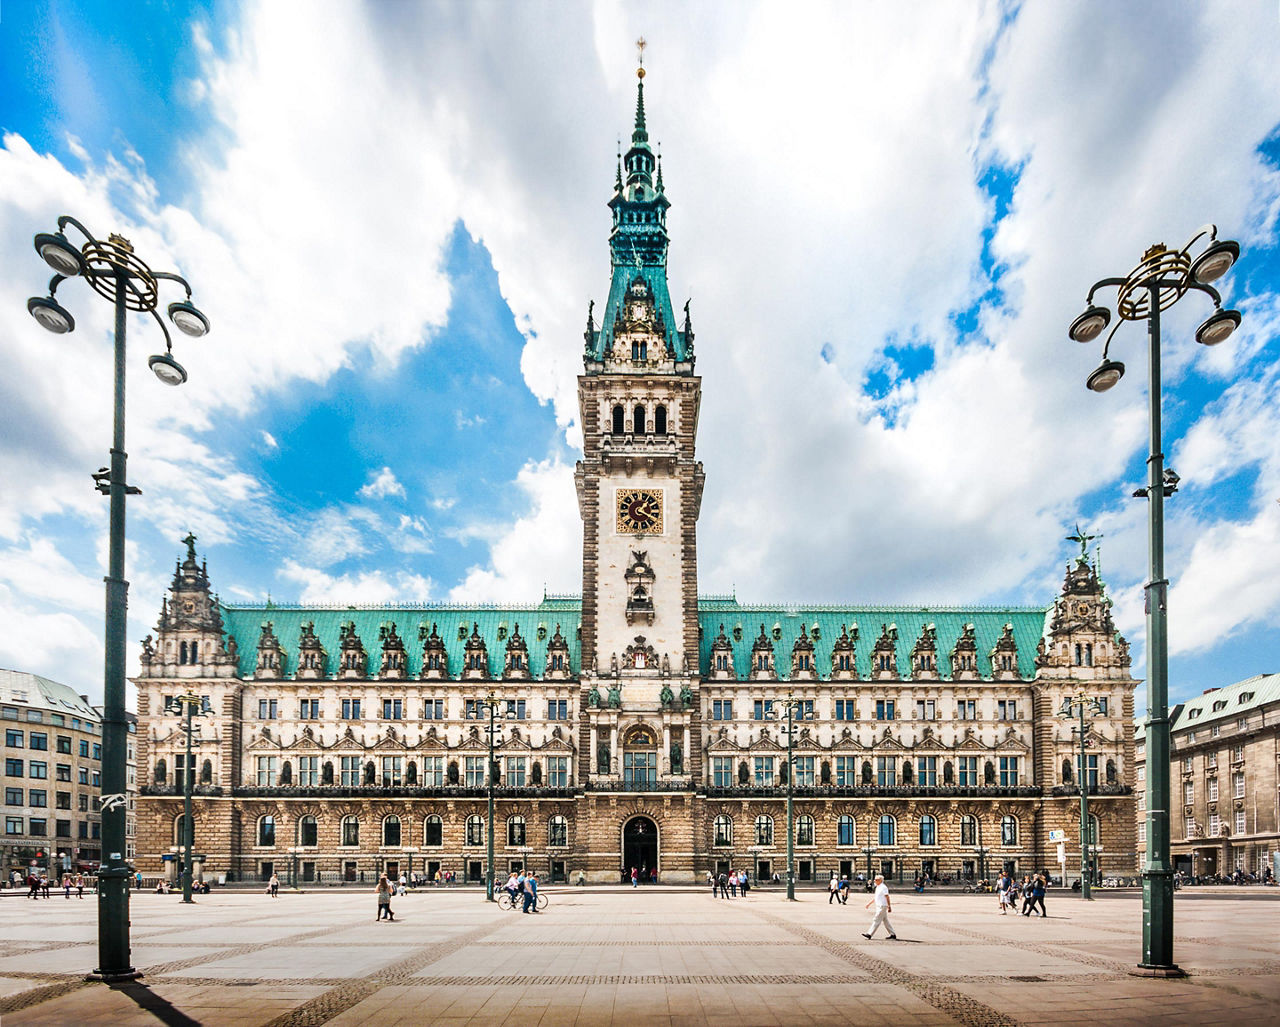 Frontal view of the town hall in Hamburg, Germany